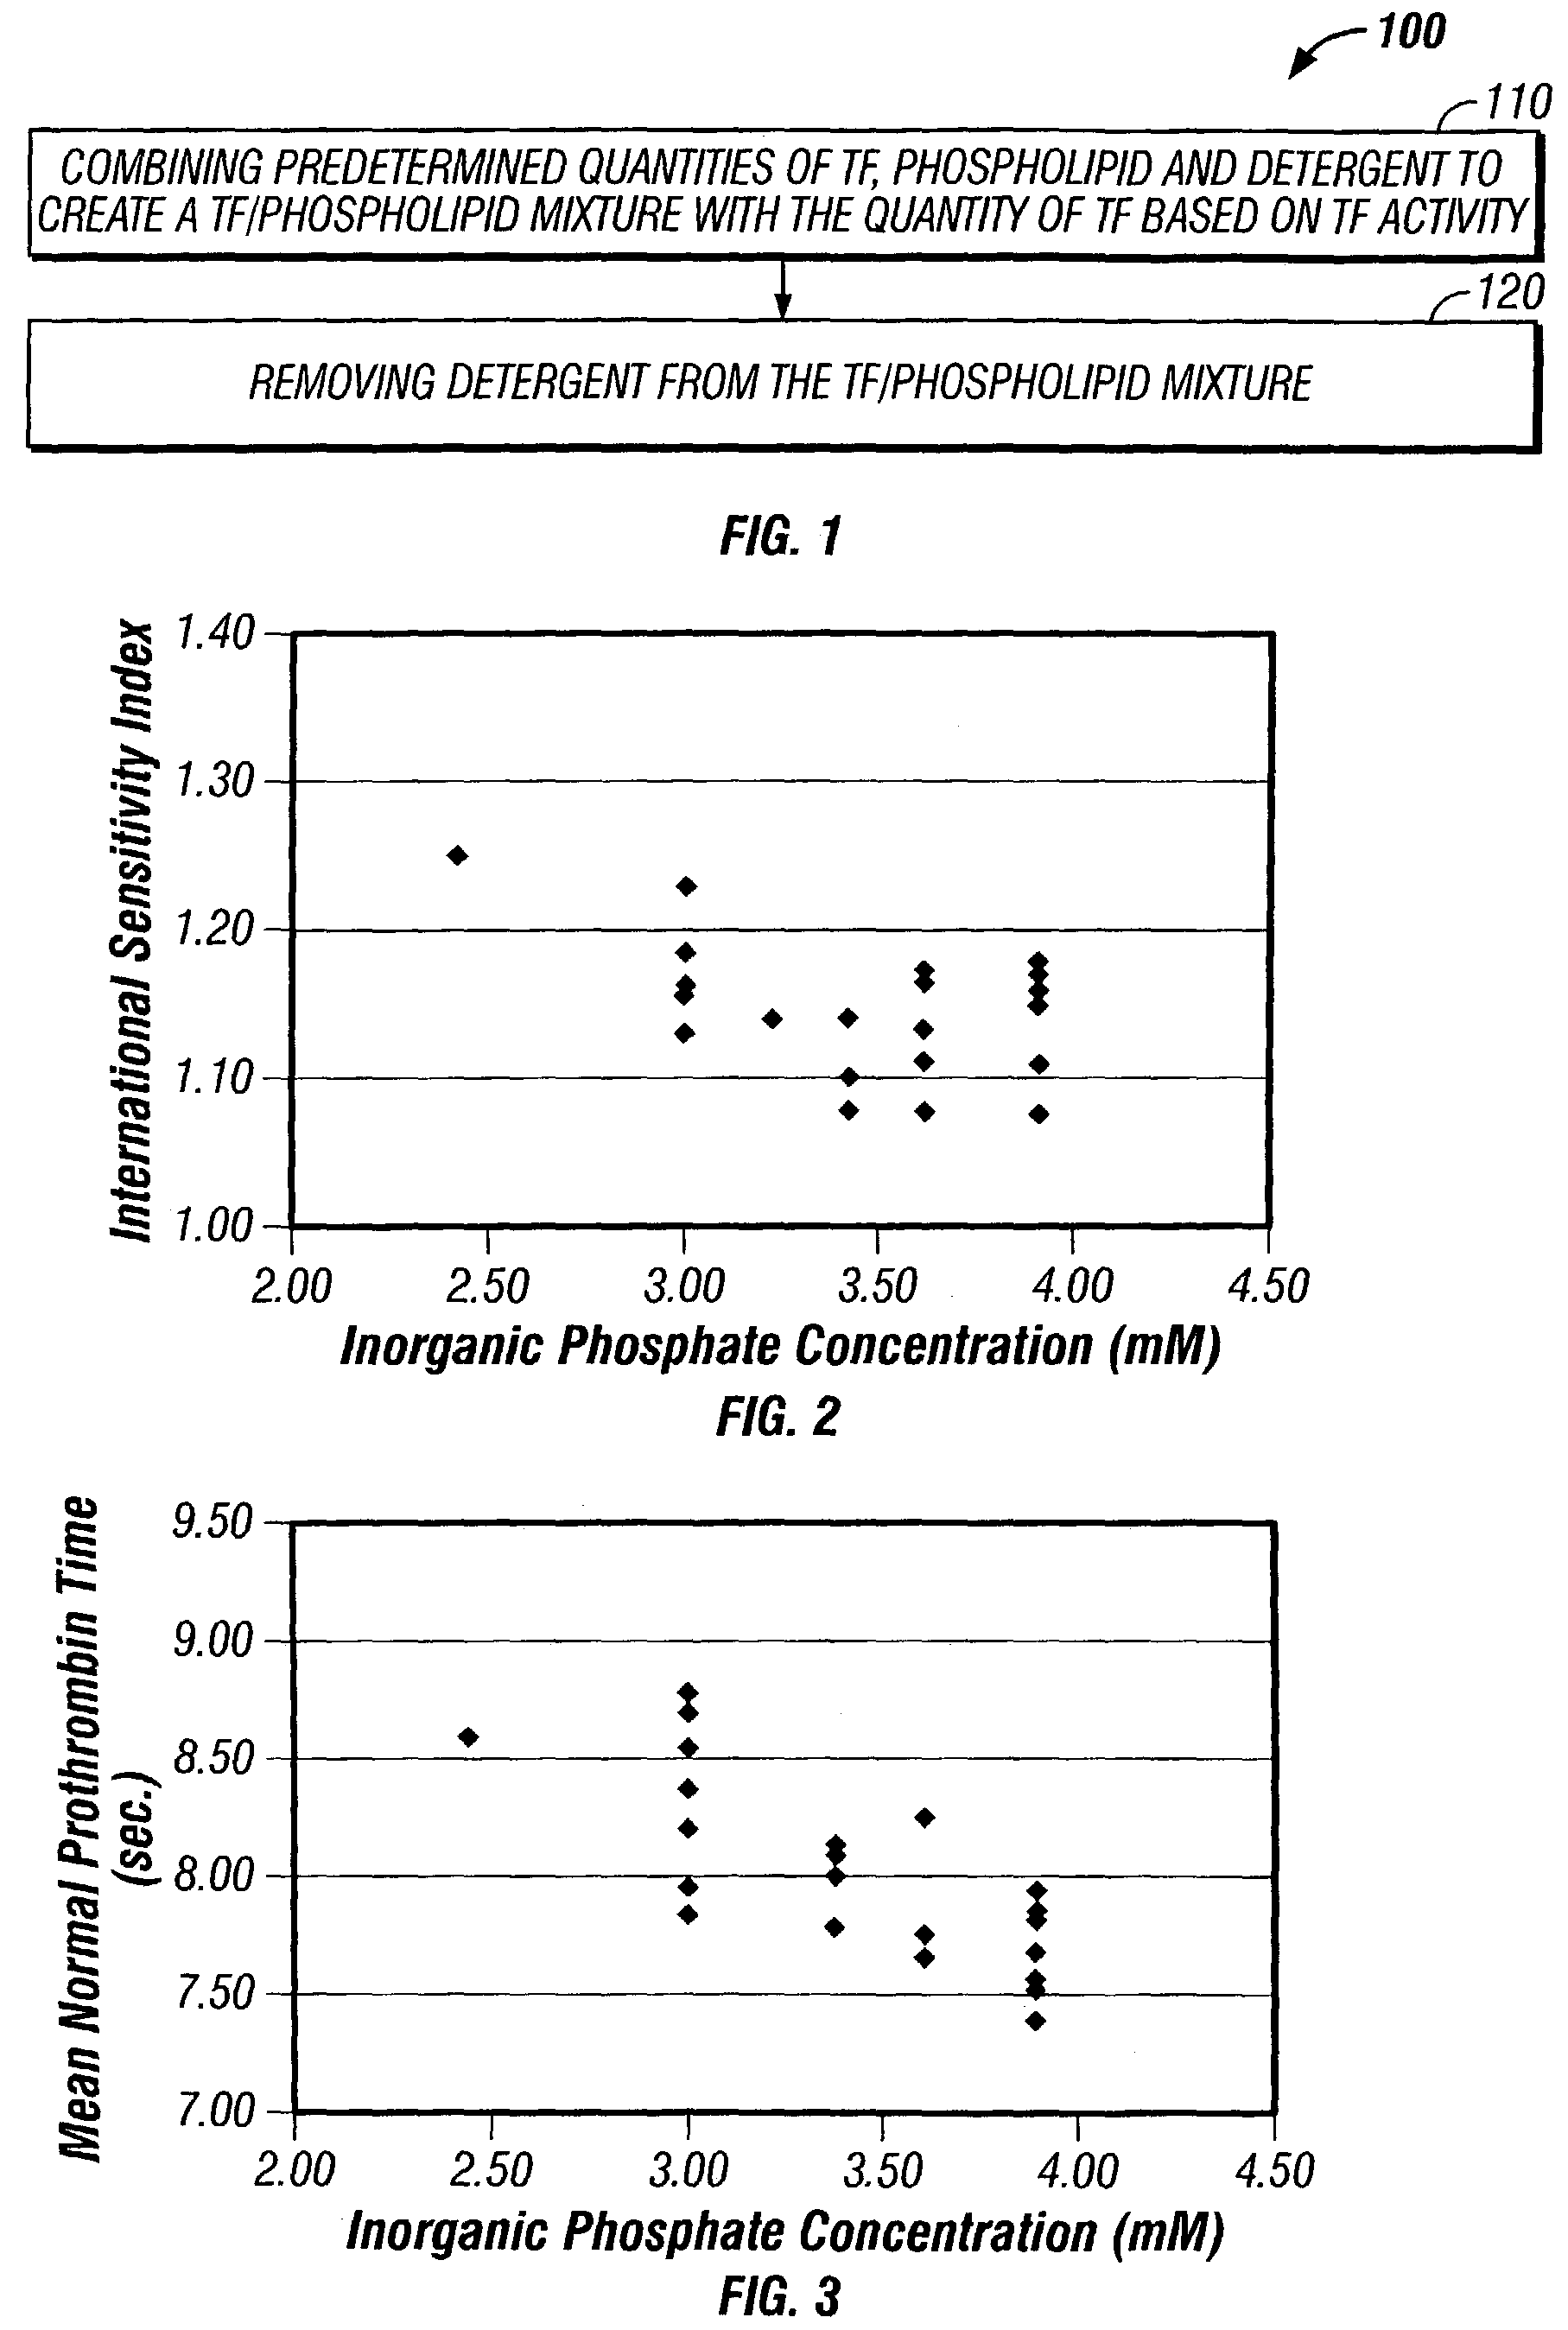 Method for manufacturing a tissue factor-based prothrombin time reagent